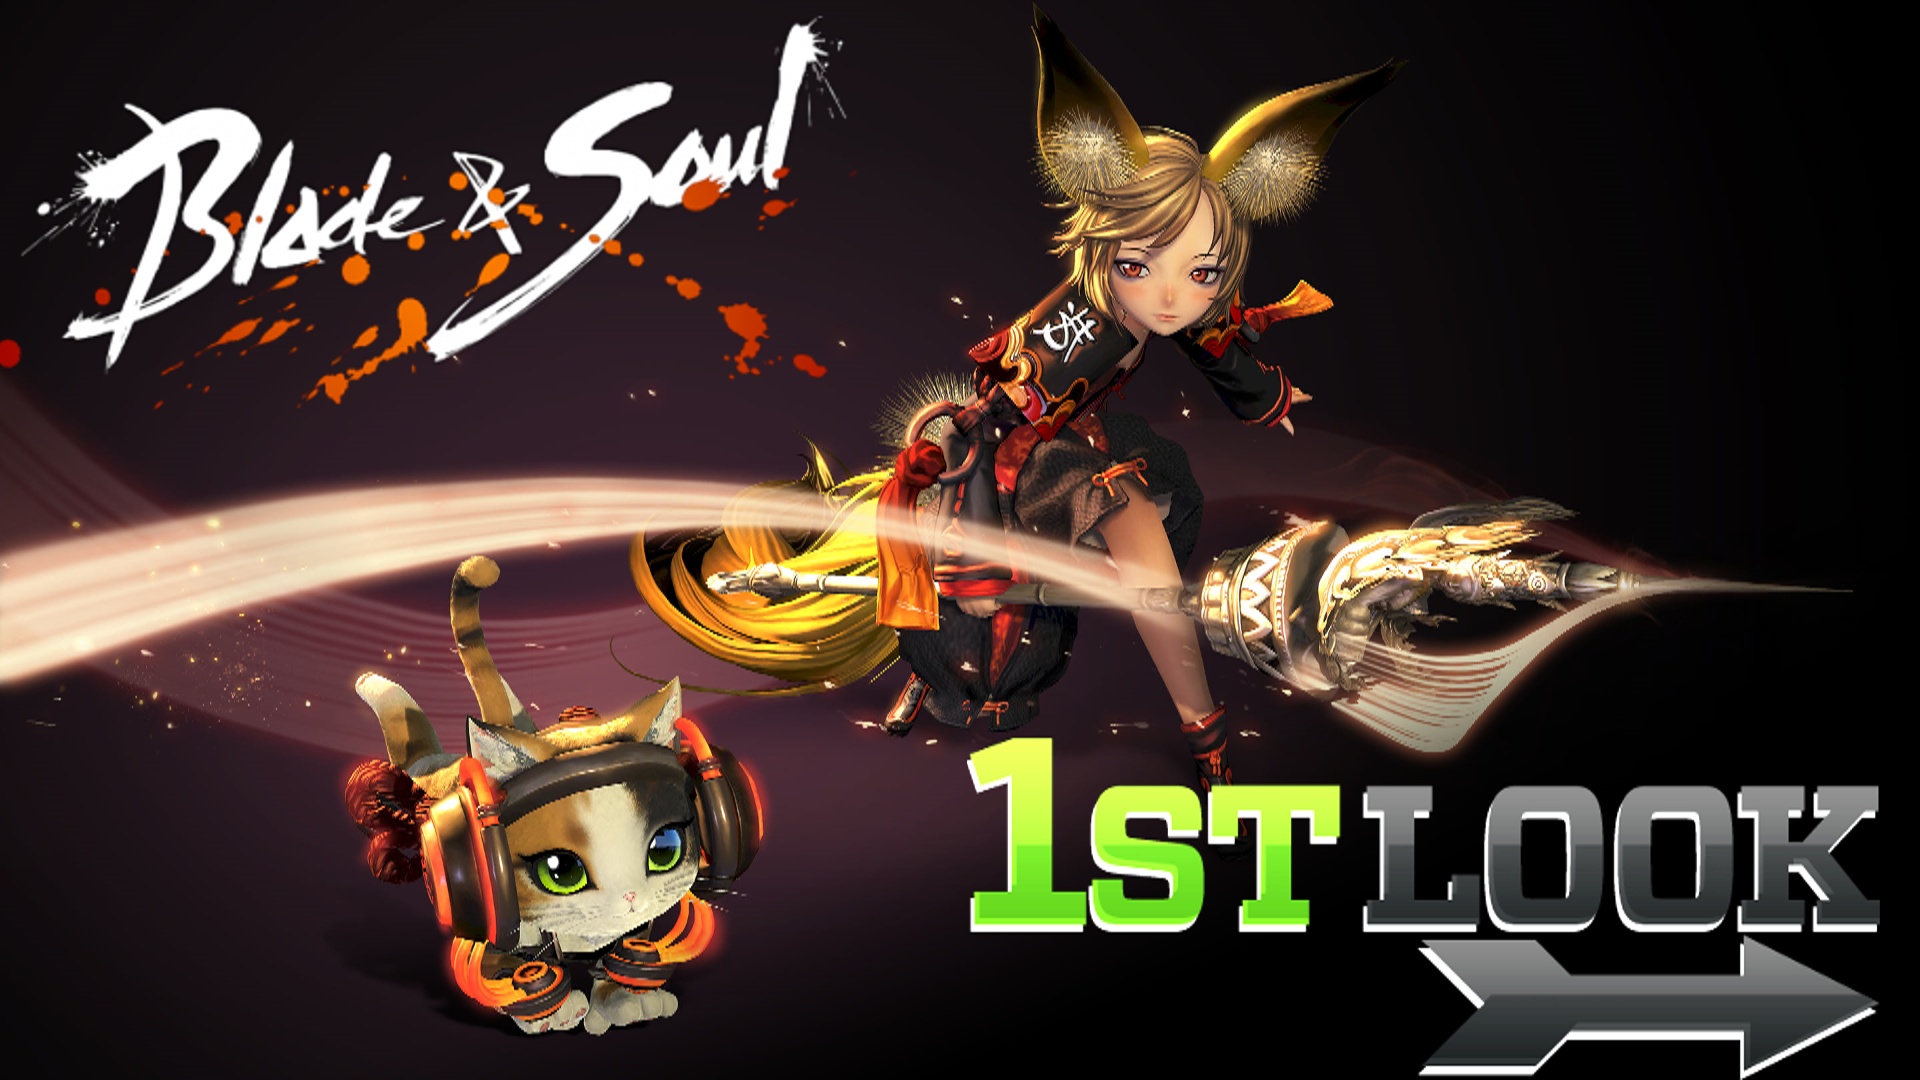 Blade & Soul - First Look NCSoft Closed Beta